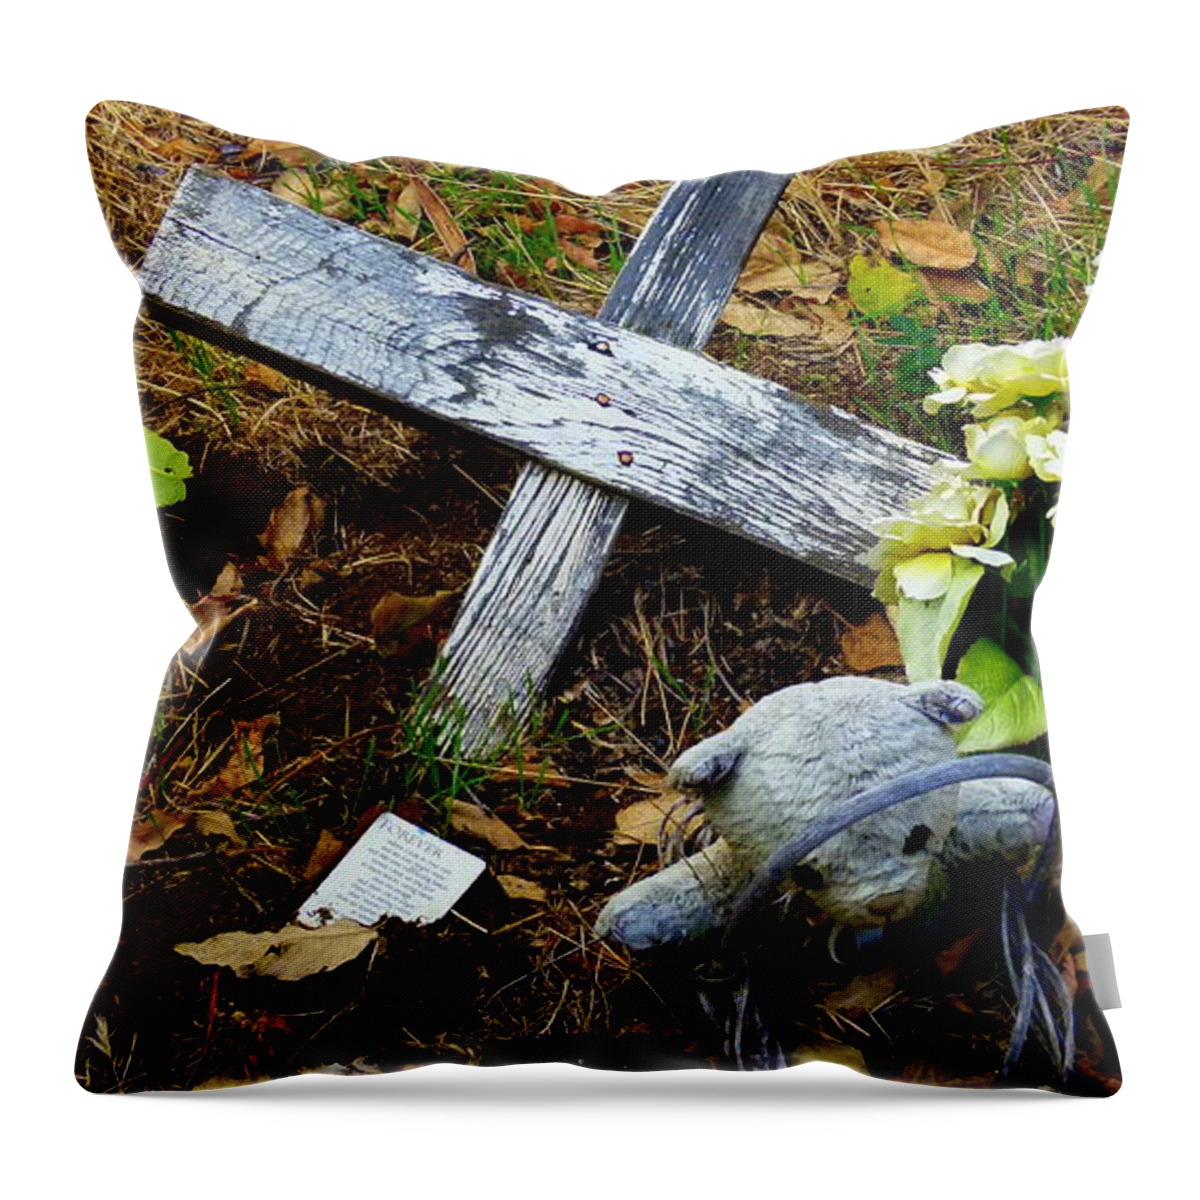 Grave Throw Pillow featuring the photograph Child's Grave by Jeff Lowe